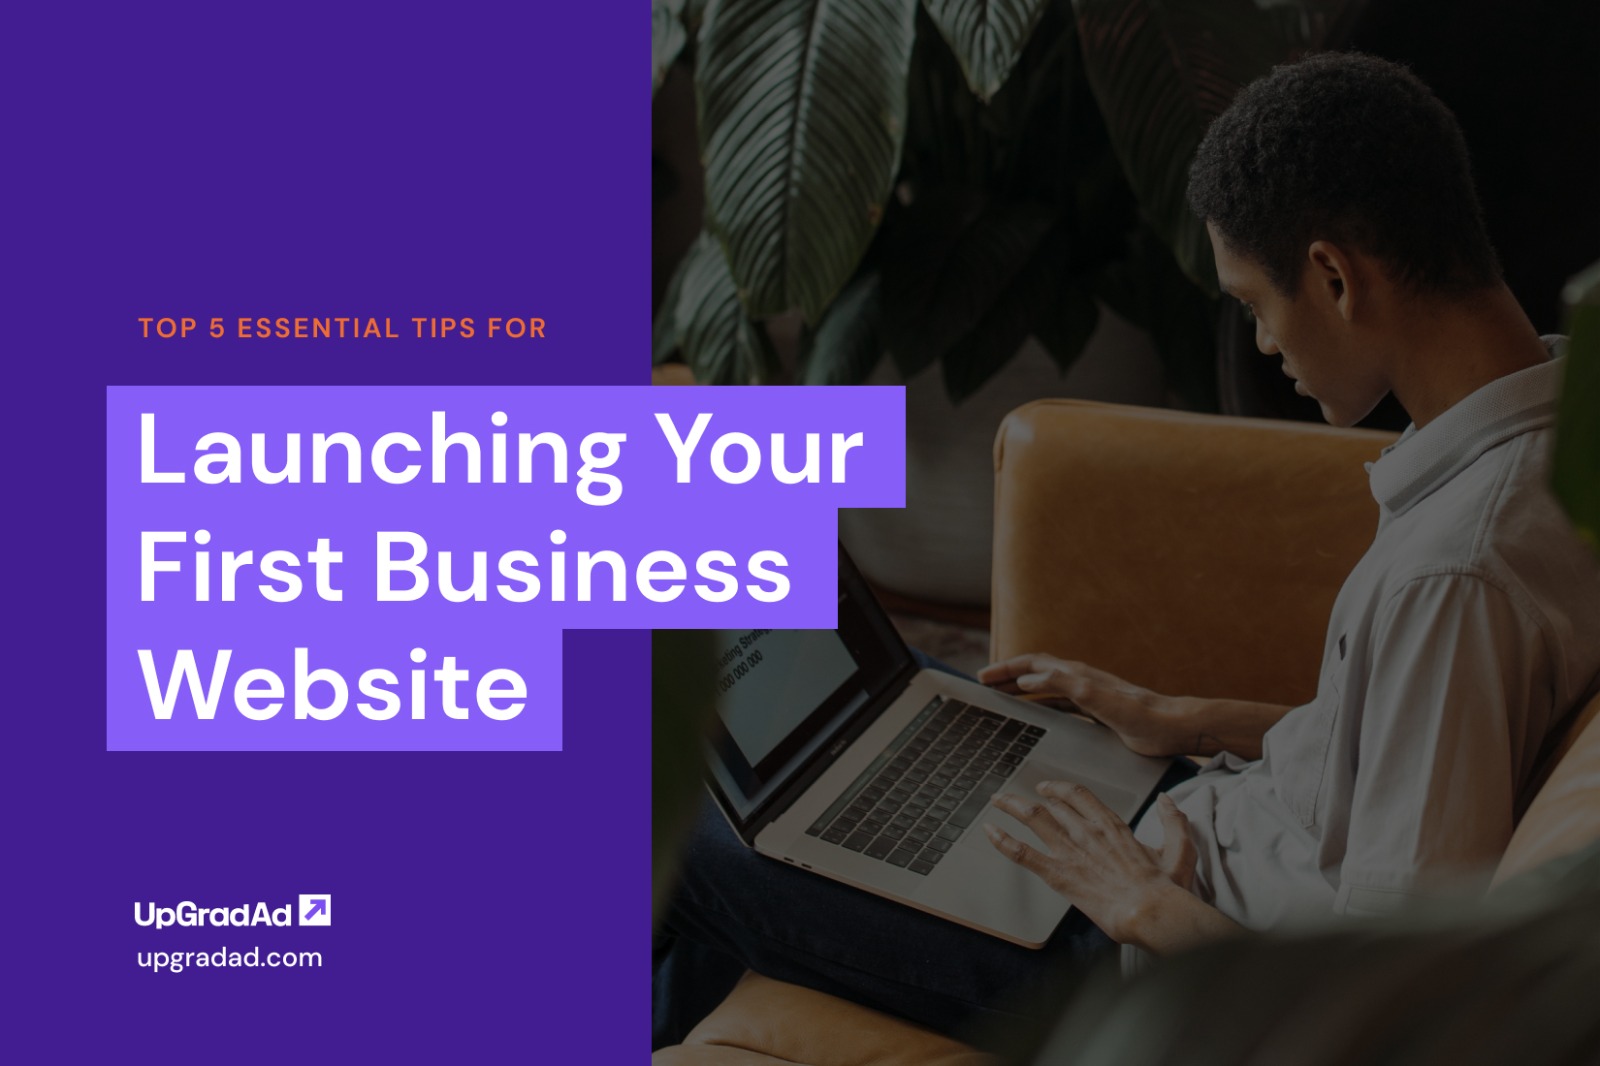 Top 5 Essential Tips for Launching Your First Business Website - UpGradAd